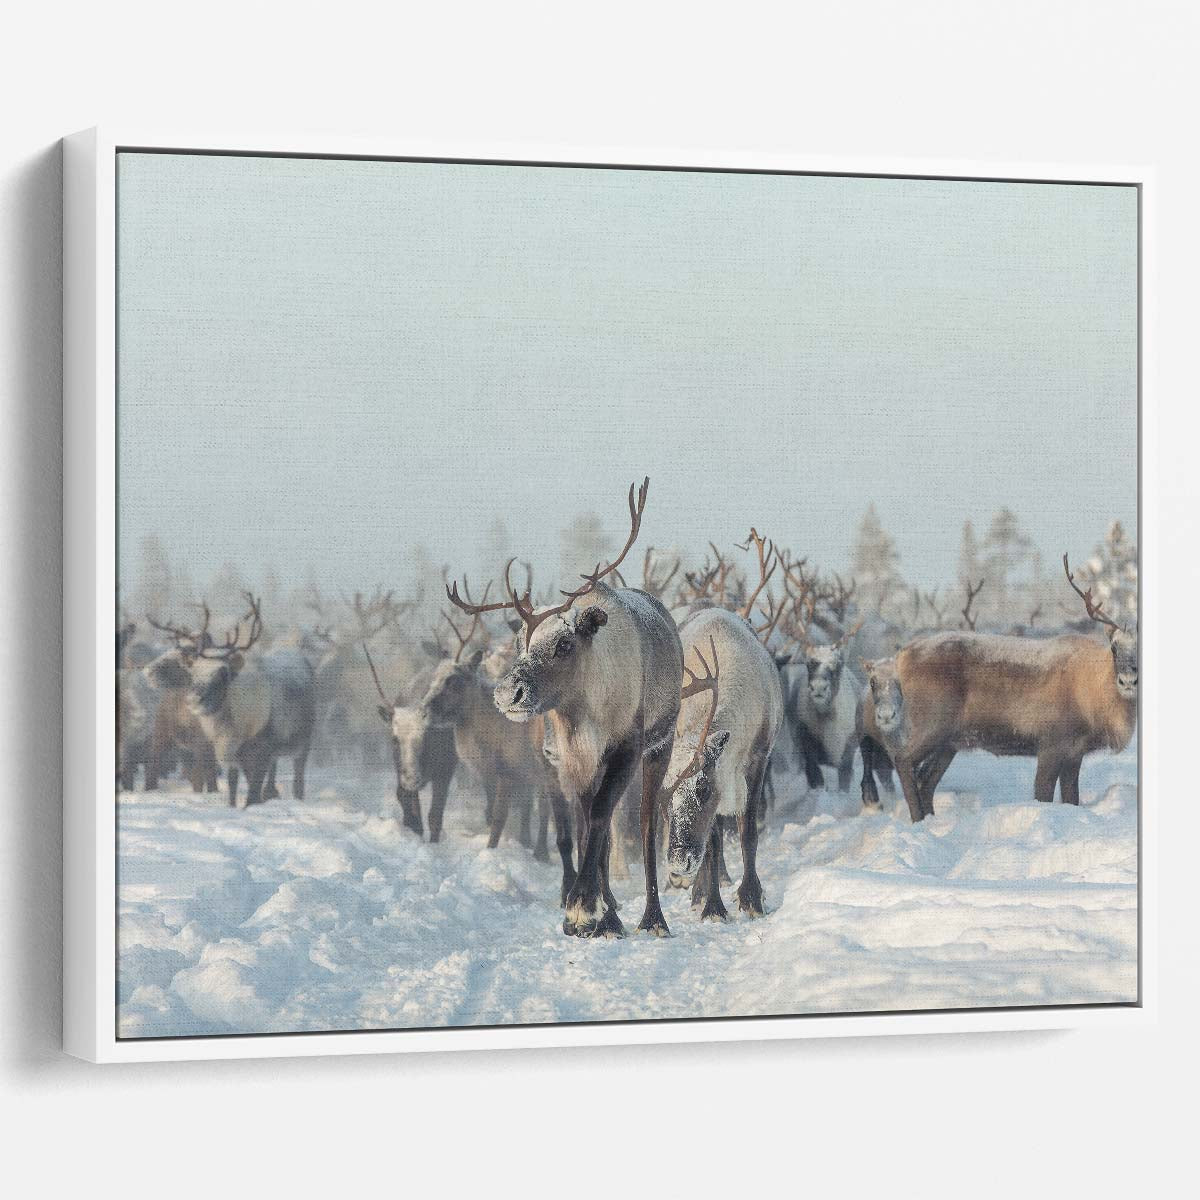 Frosty Winter Reindeer Herd Snowscape Wall Art by Luxuriance Designs. Made in USA.